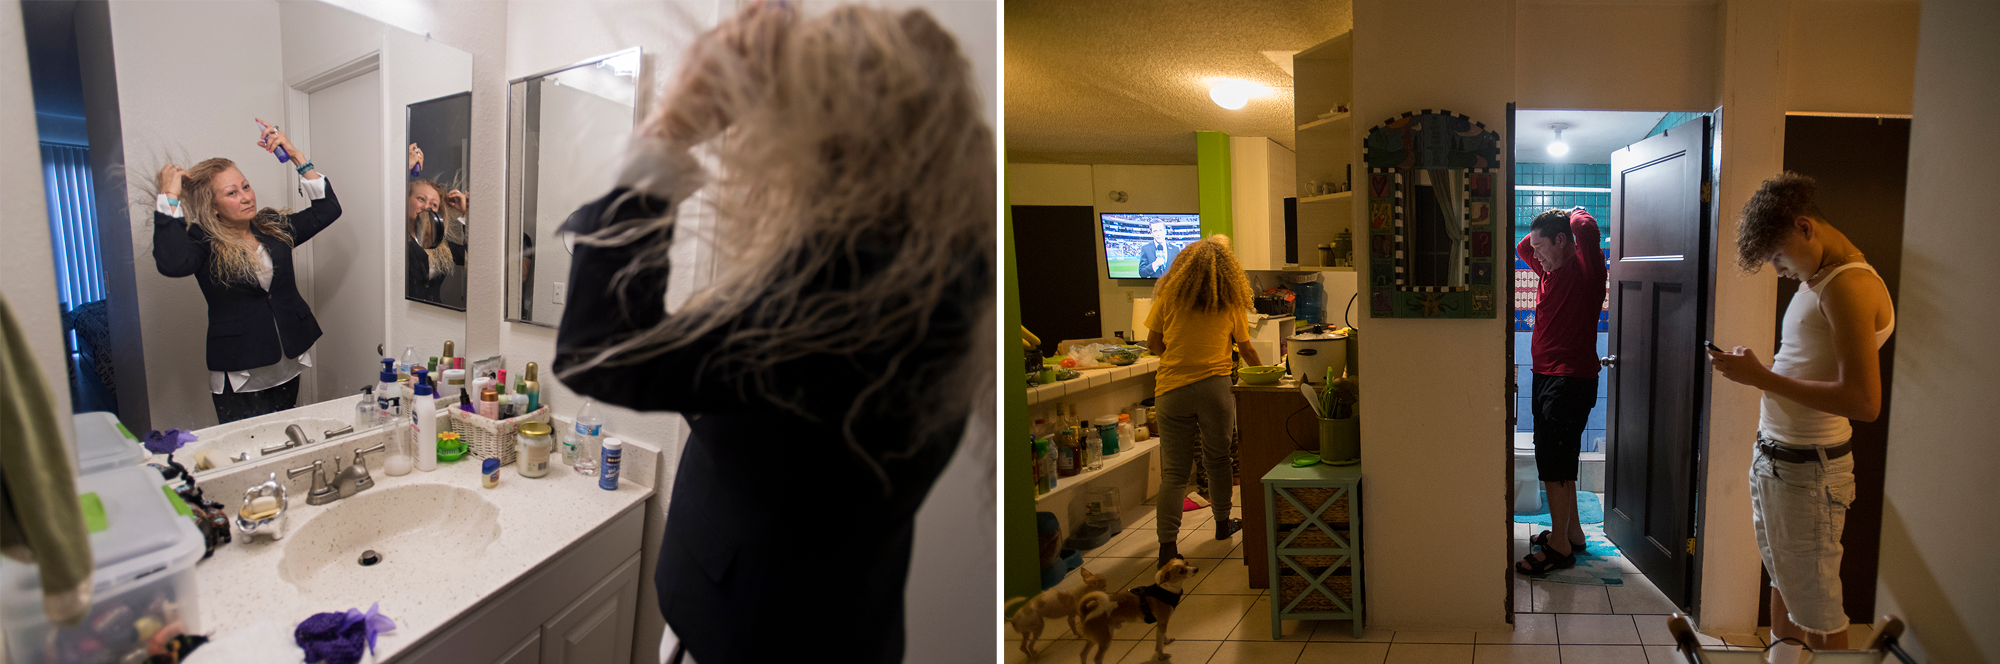 Enedis Flores gets ready for work in Chula Vista, Calif., on Nov. 27. At right, Ramon Flores, center, cleans up after work before for Thanksgiving dinner with his family in the apartment he rents in Tijuana, Mexico. Son Raymond, 15, checks his phone. Images by Amanda Cowan. United States / Mexico, 2019.